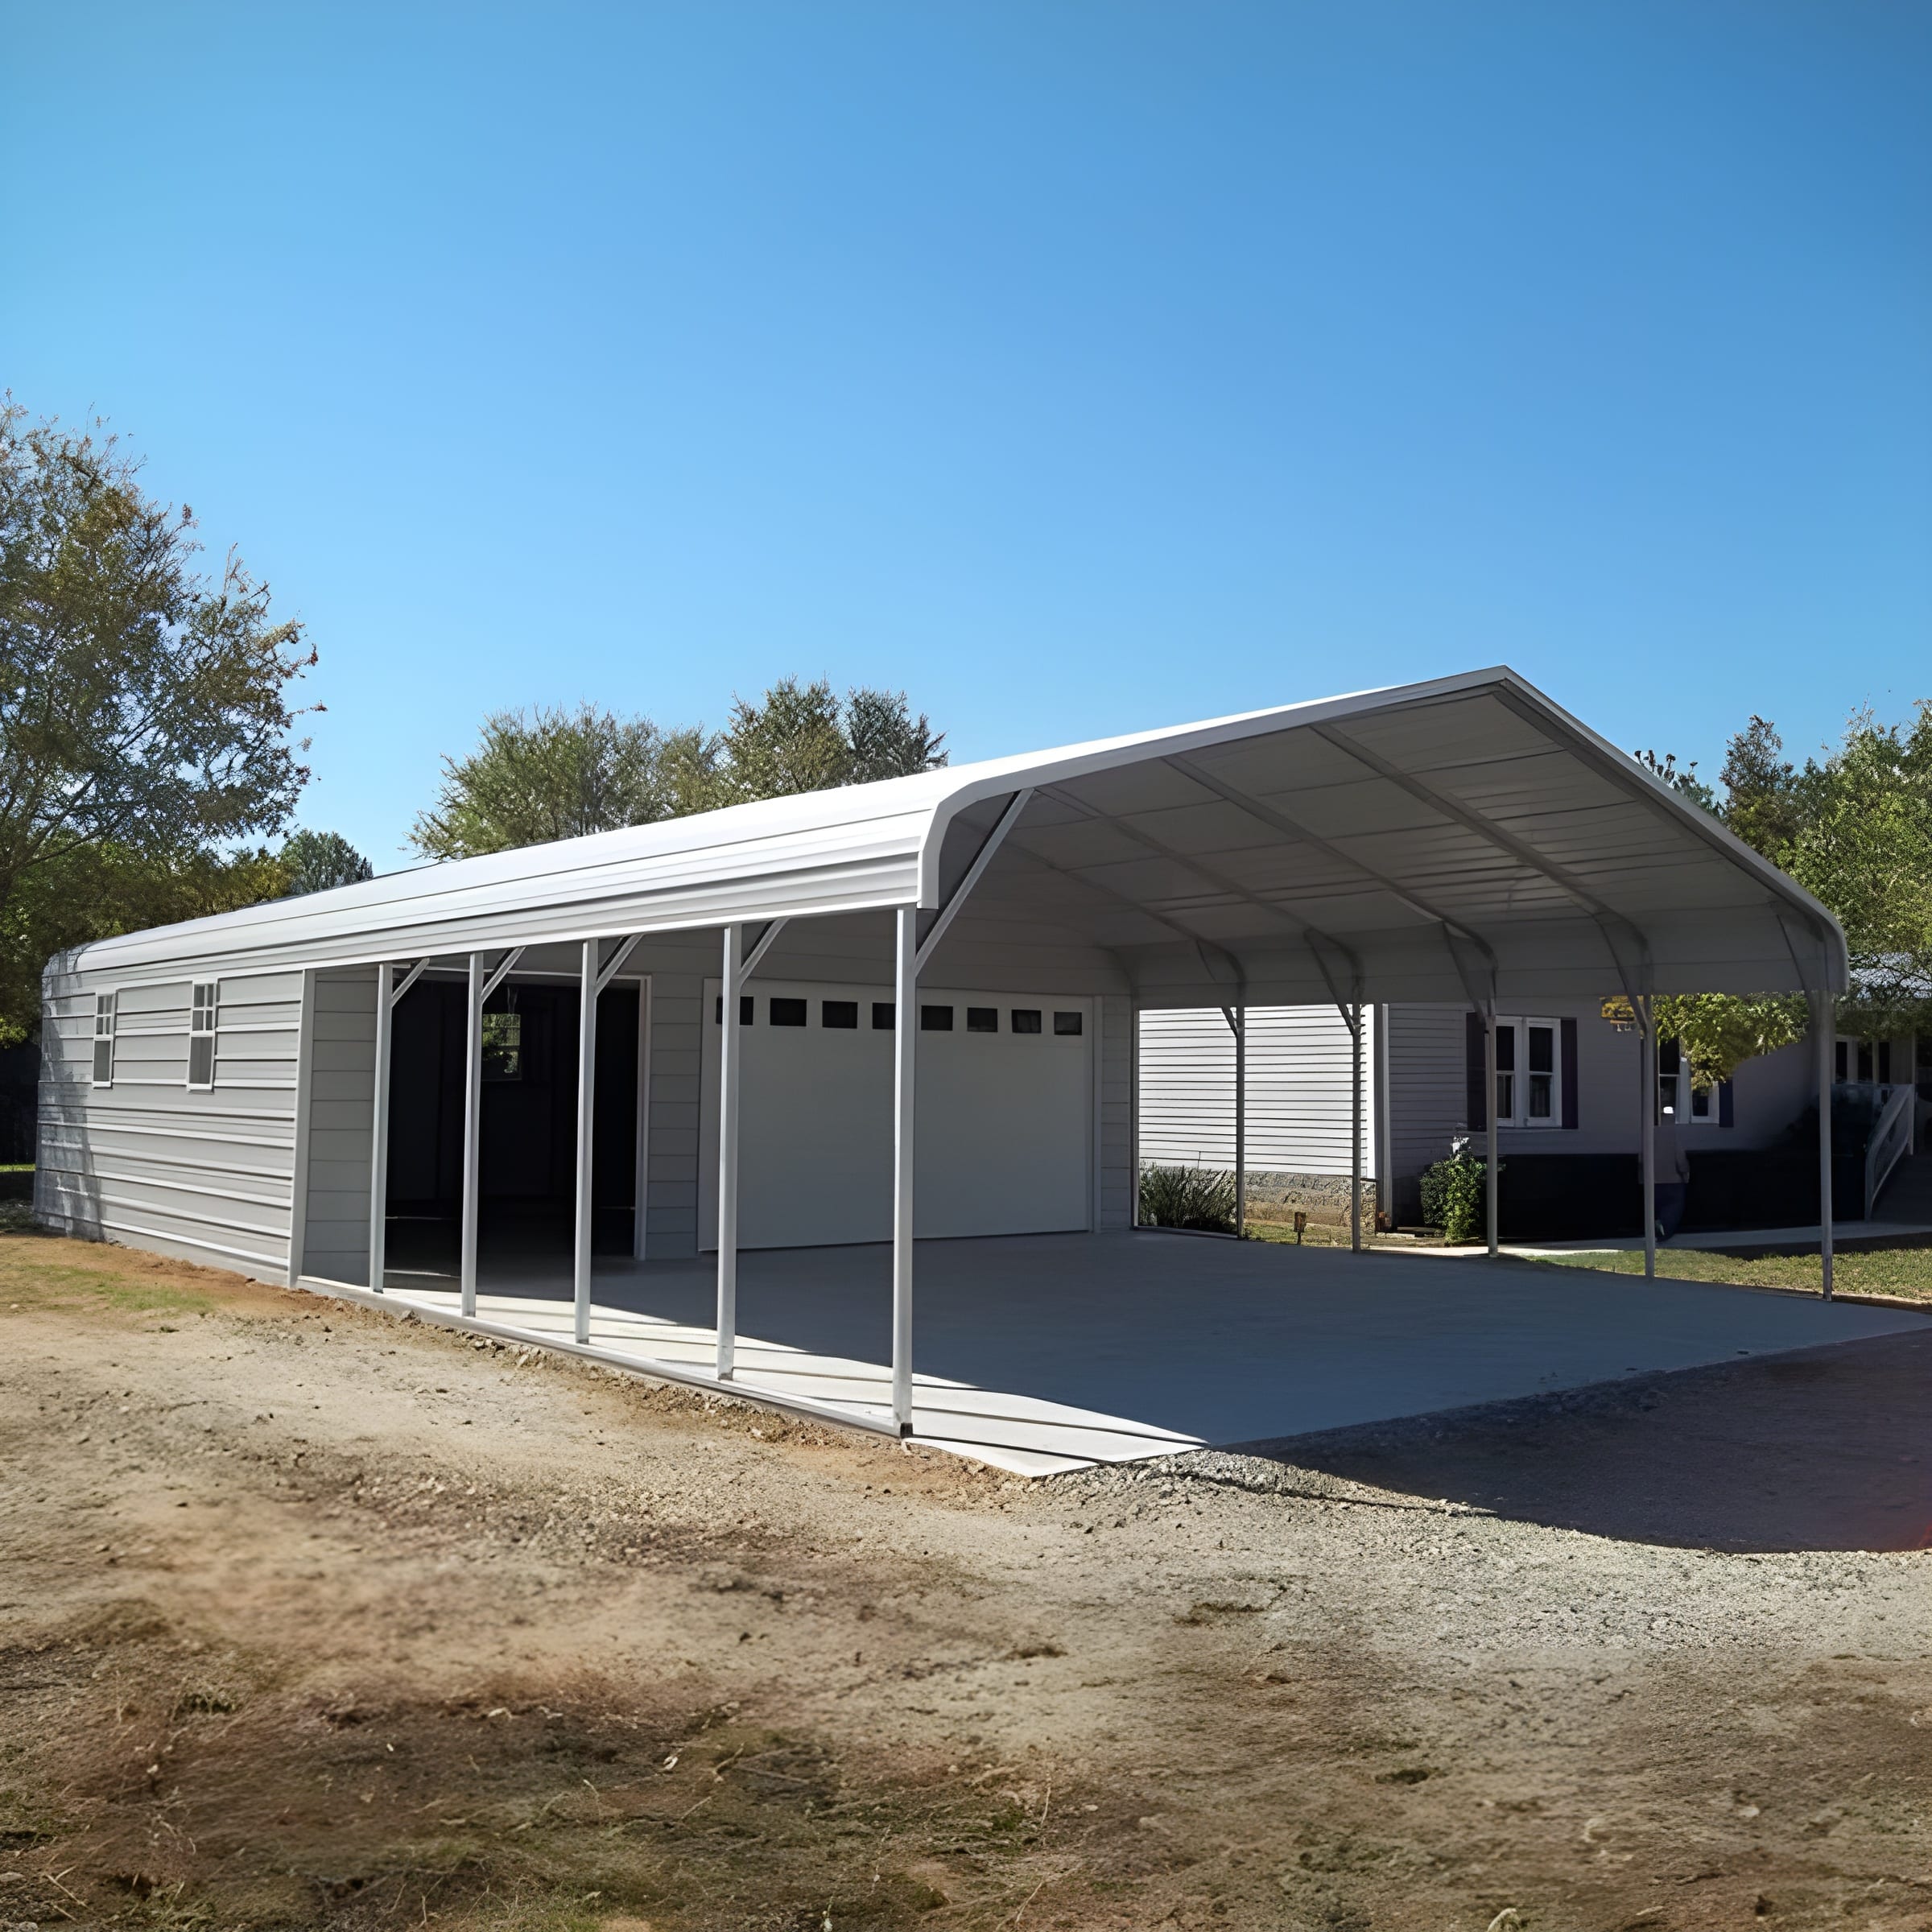 A selection of metal buildings including carports, combo units, and garages offered by Outdoor Options.